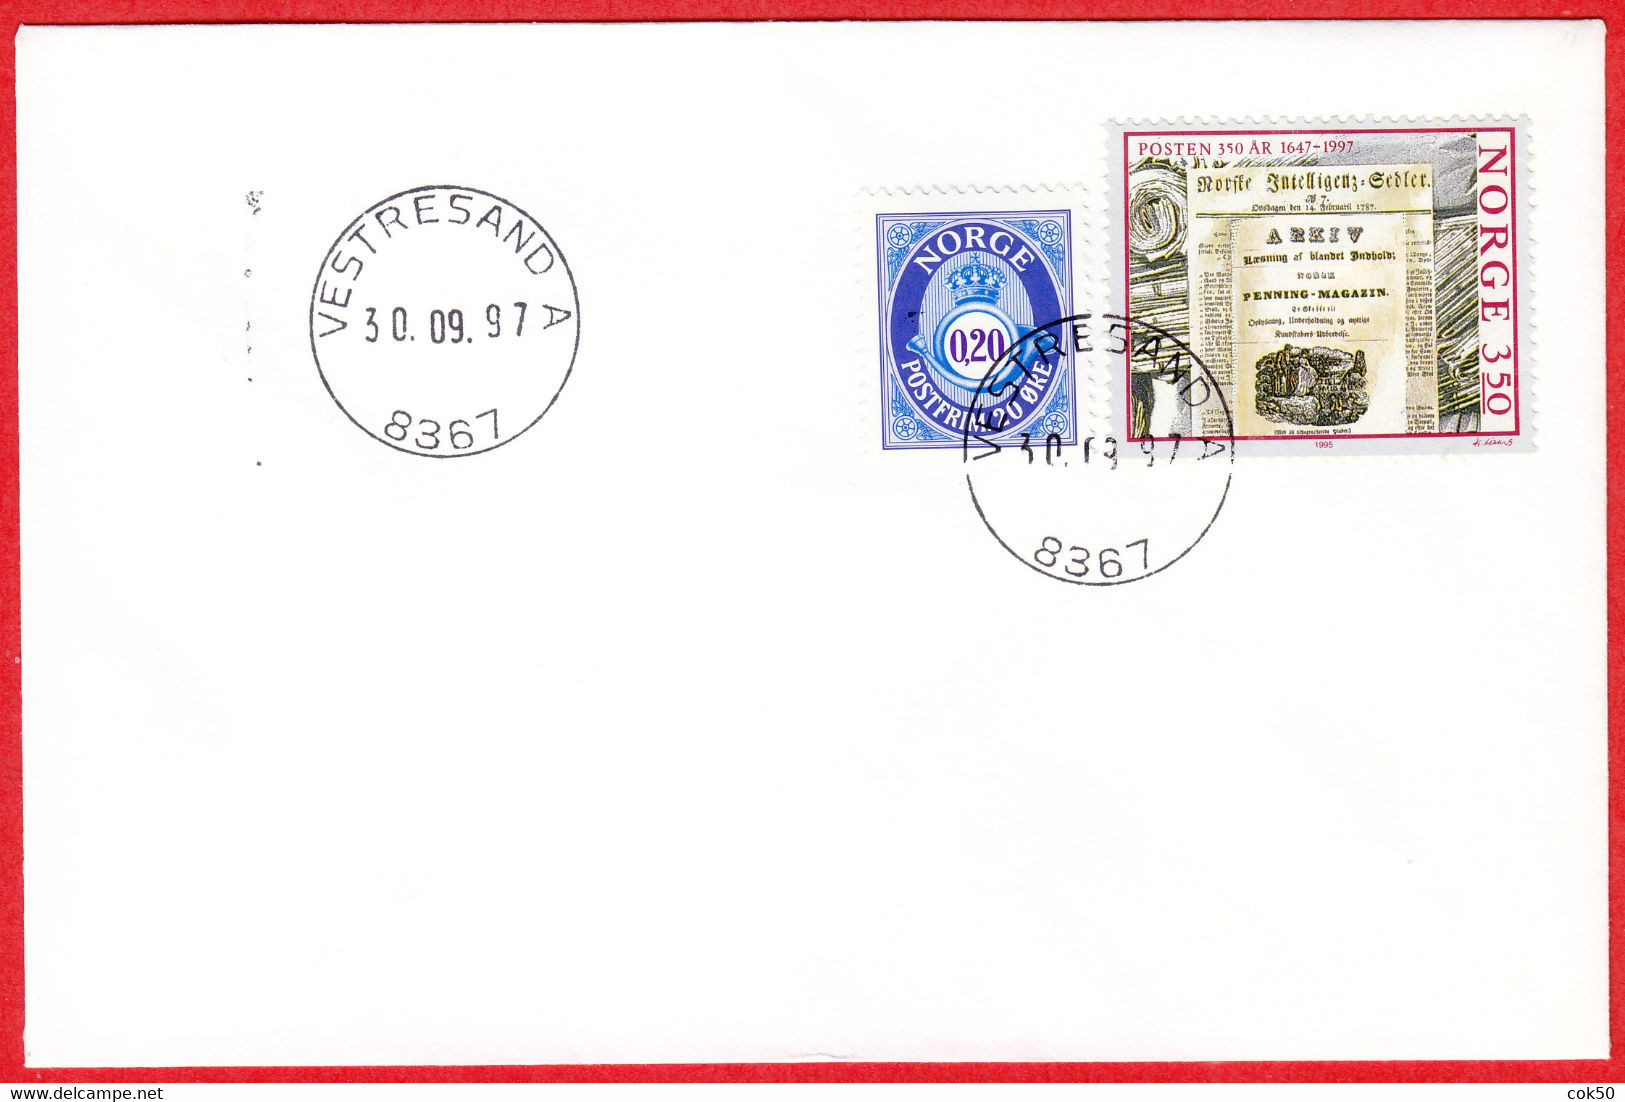 NORWAY -  8367 VESTRESAND A - 24 MmØ - (Nordland County) - Last Day/postoffice Closed On 1997.09.30 - Local Post Stamps